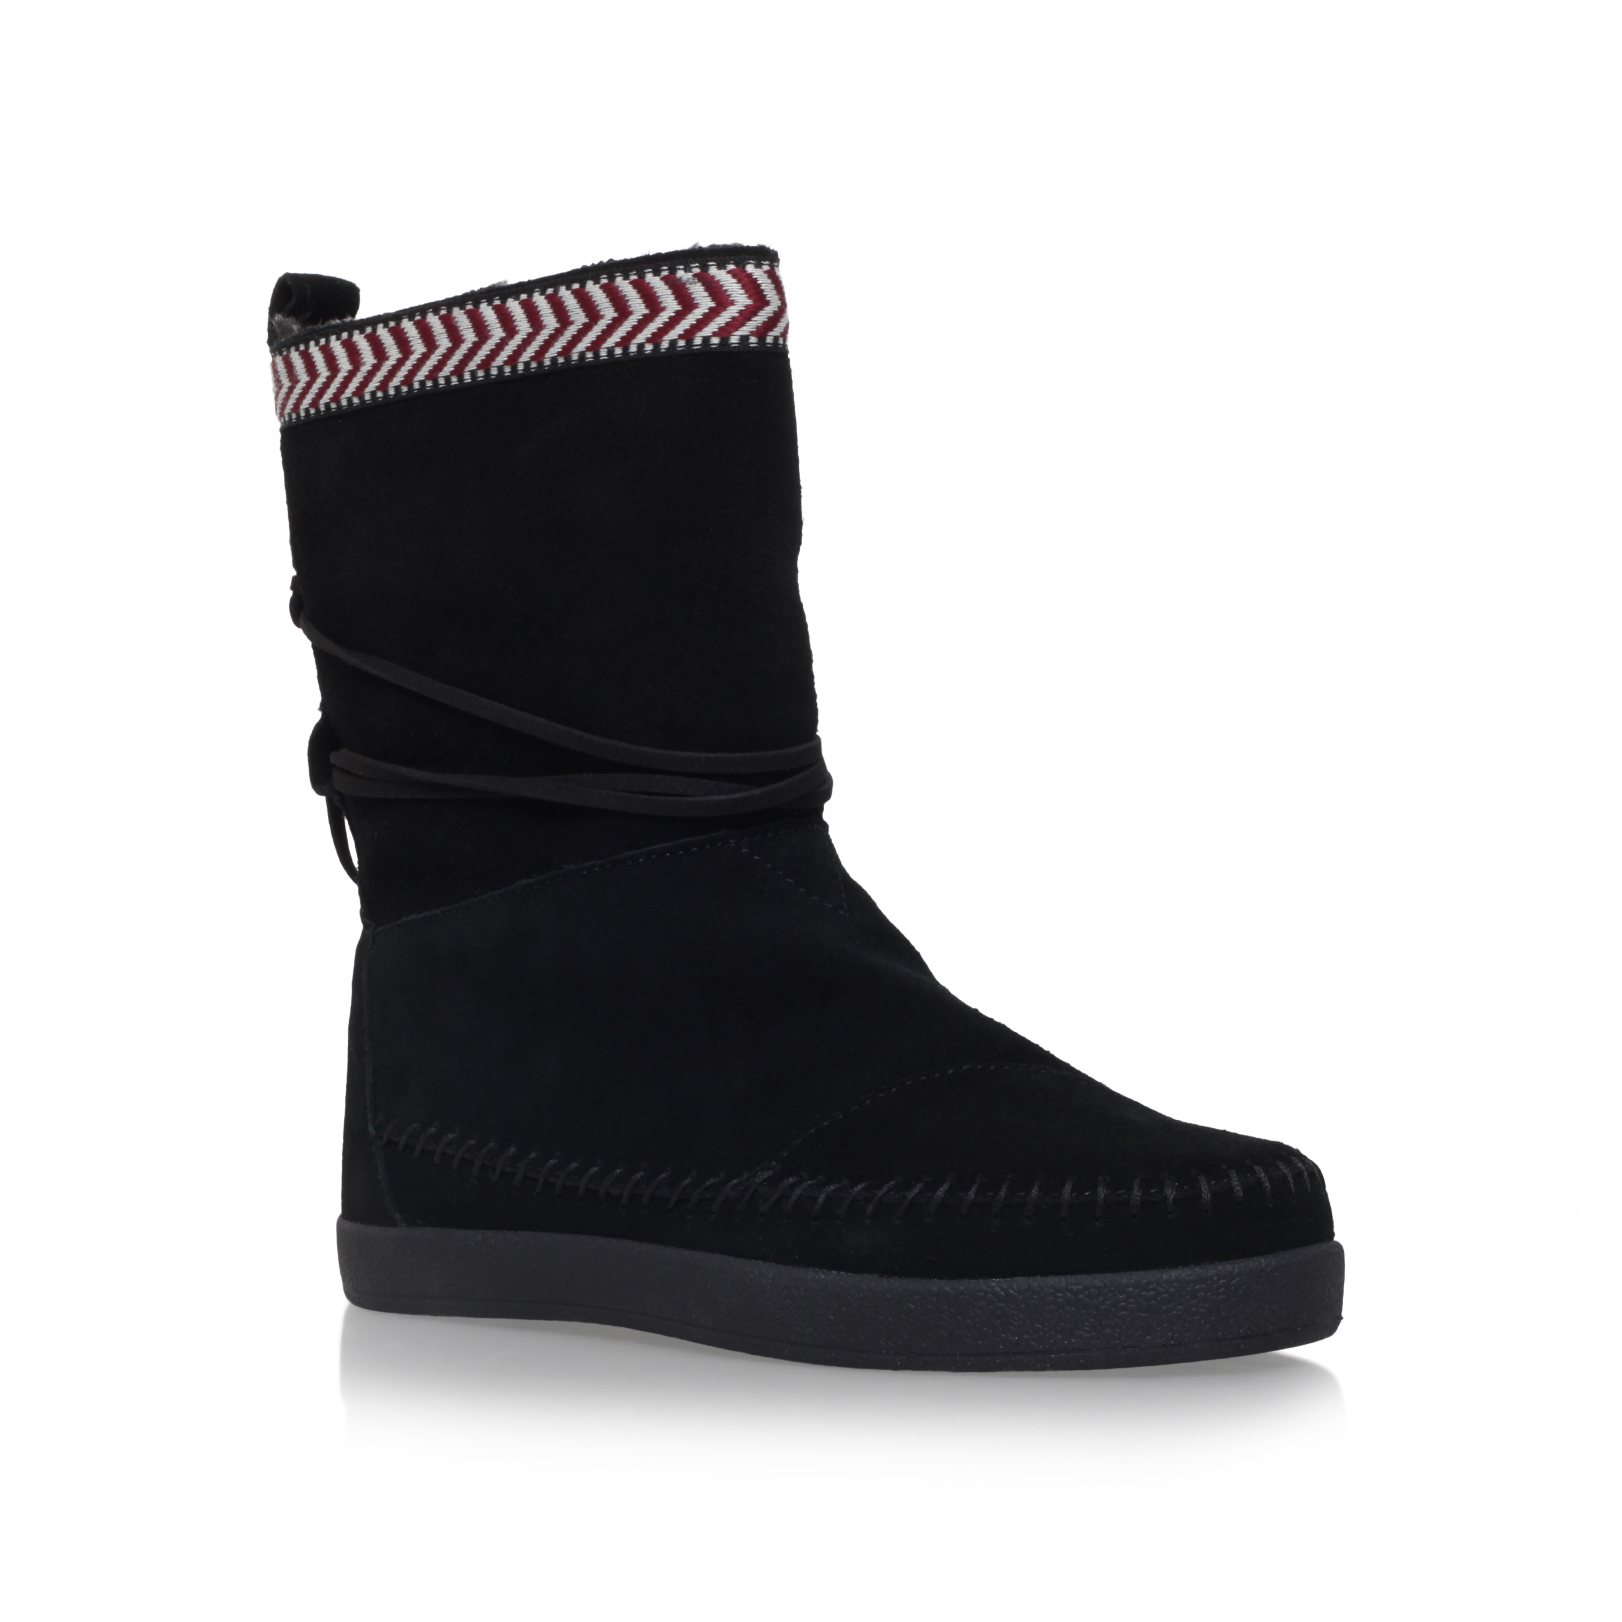 NEPAL BOOT Toms Nepal Boot Black Suede 